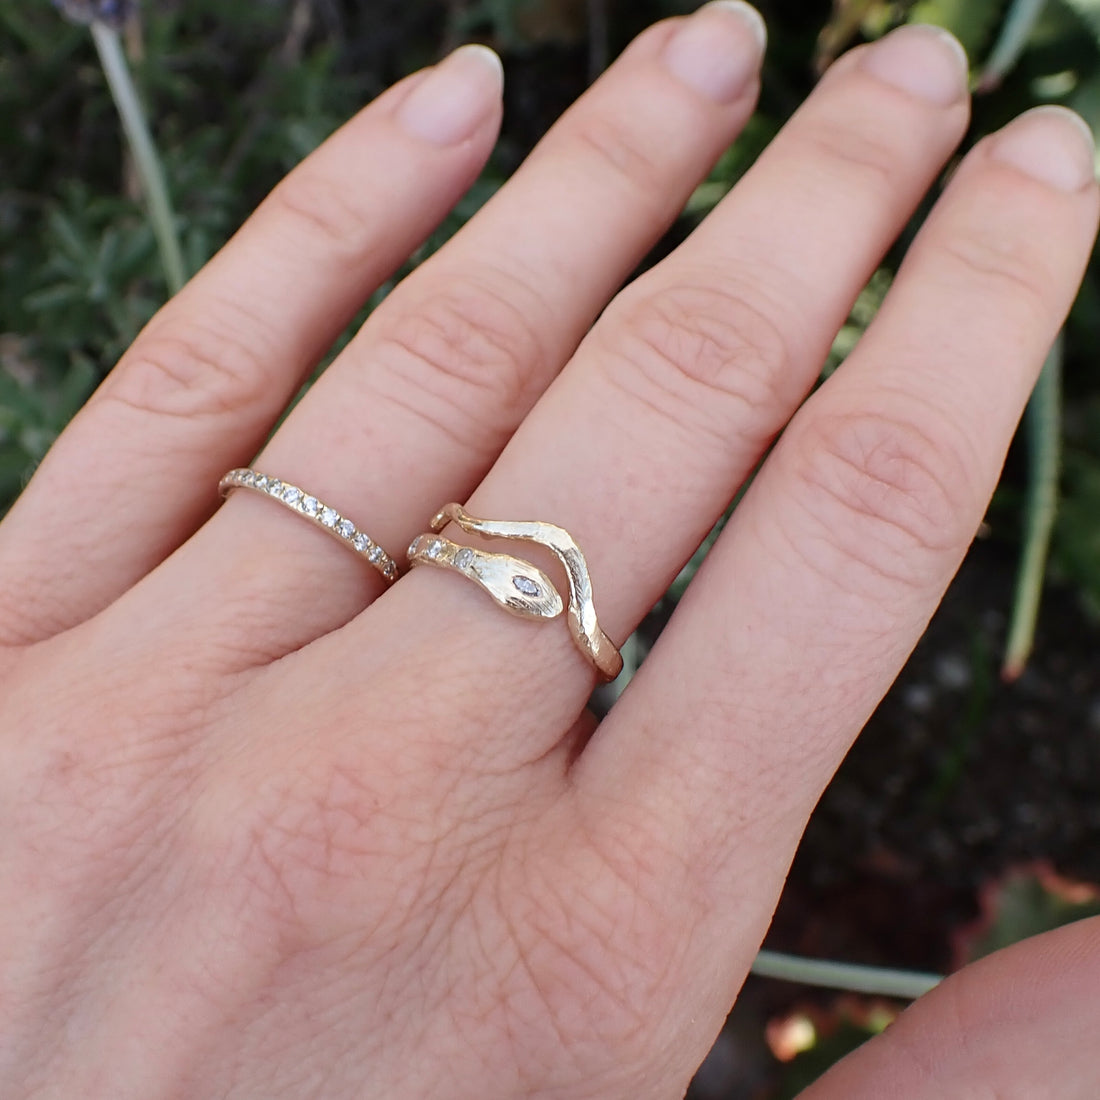 Serpent snake ring, 14k Gold with diamonds